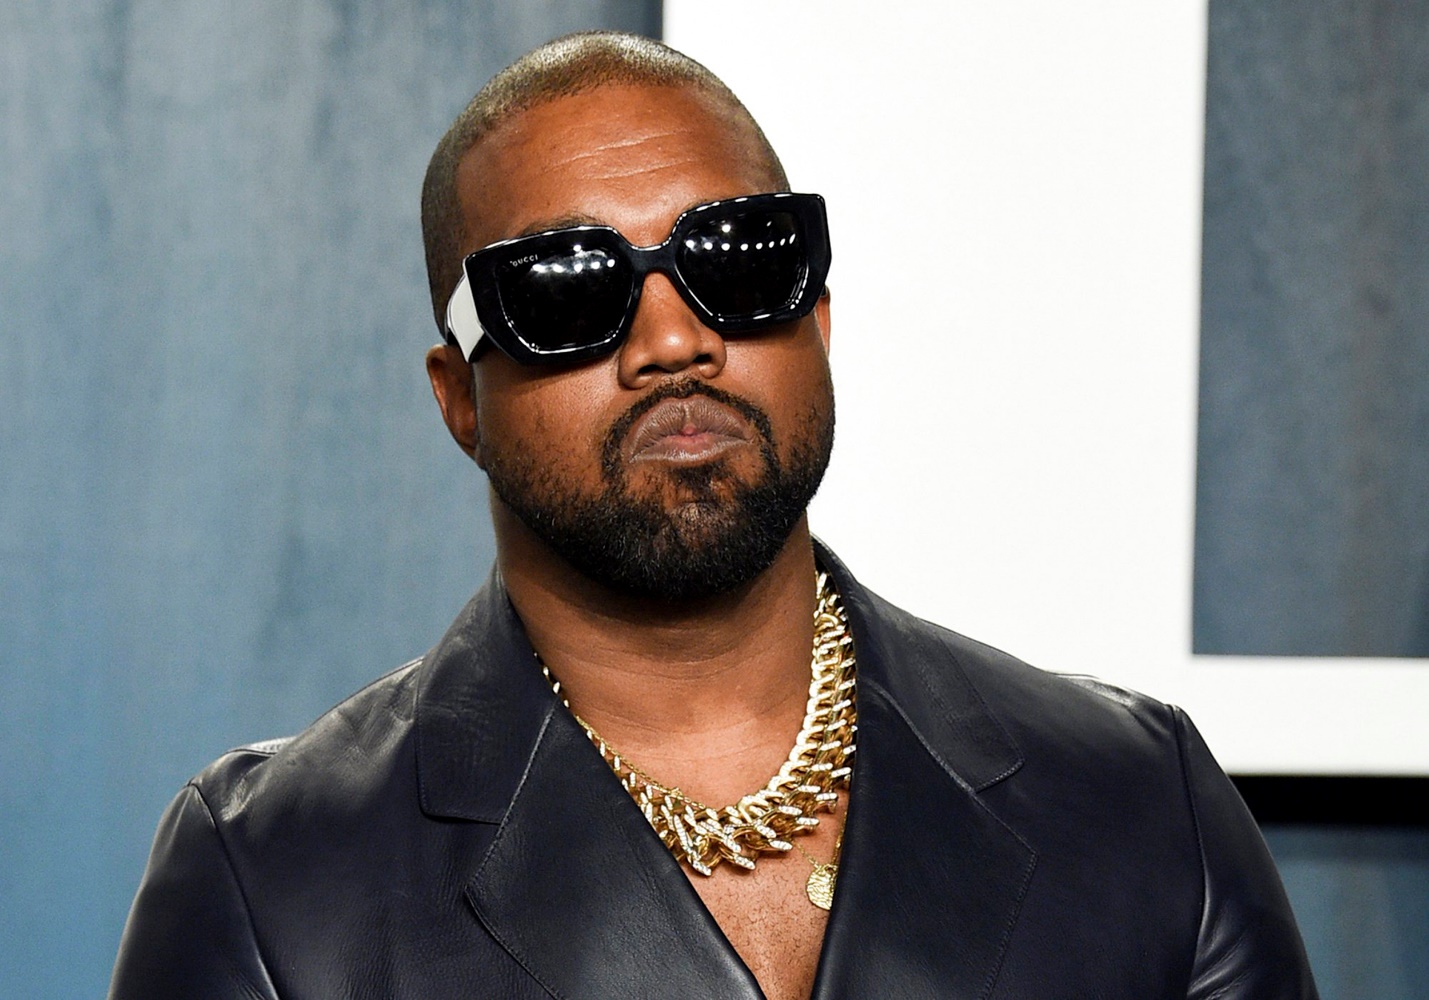 Kanye to Make Sure Paparazzi Pay Celebrities for Taking Their Photos